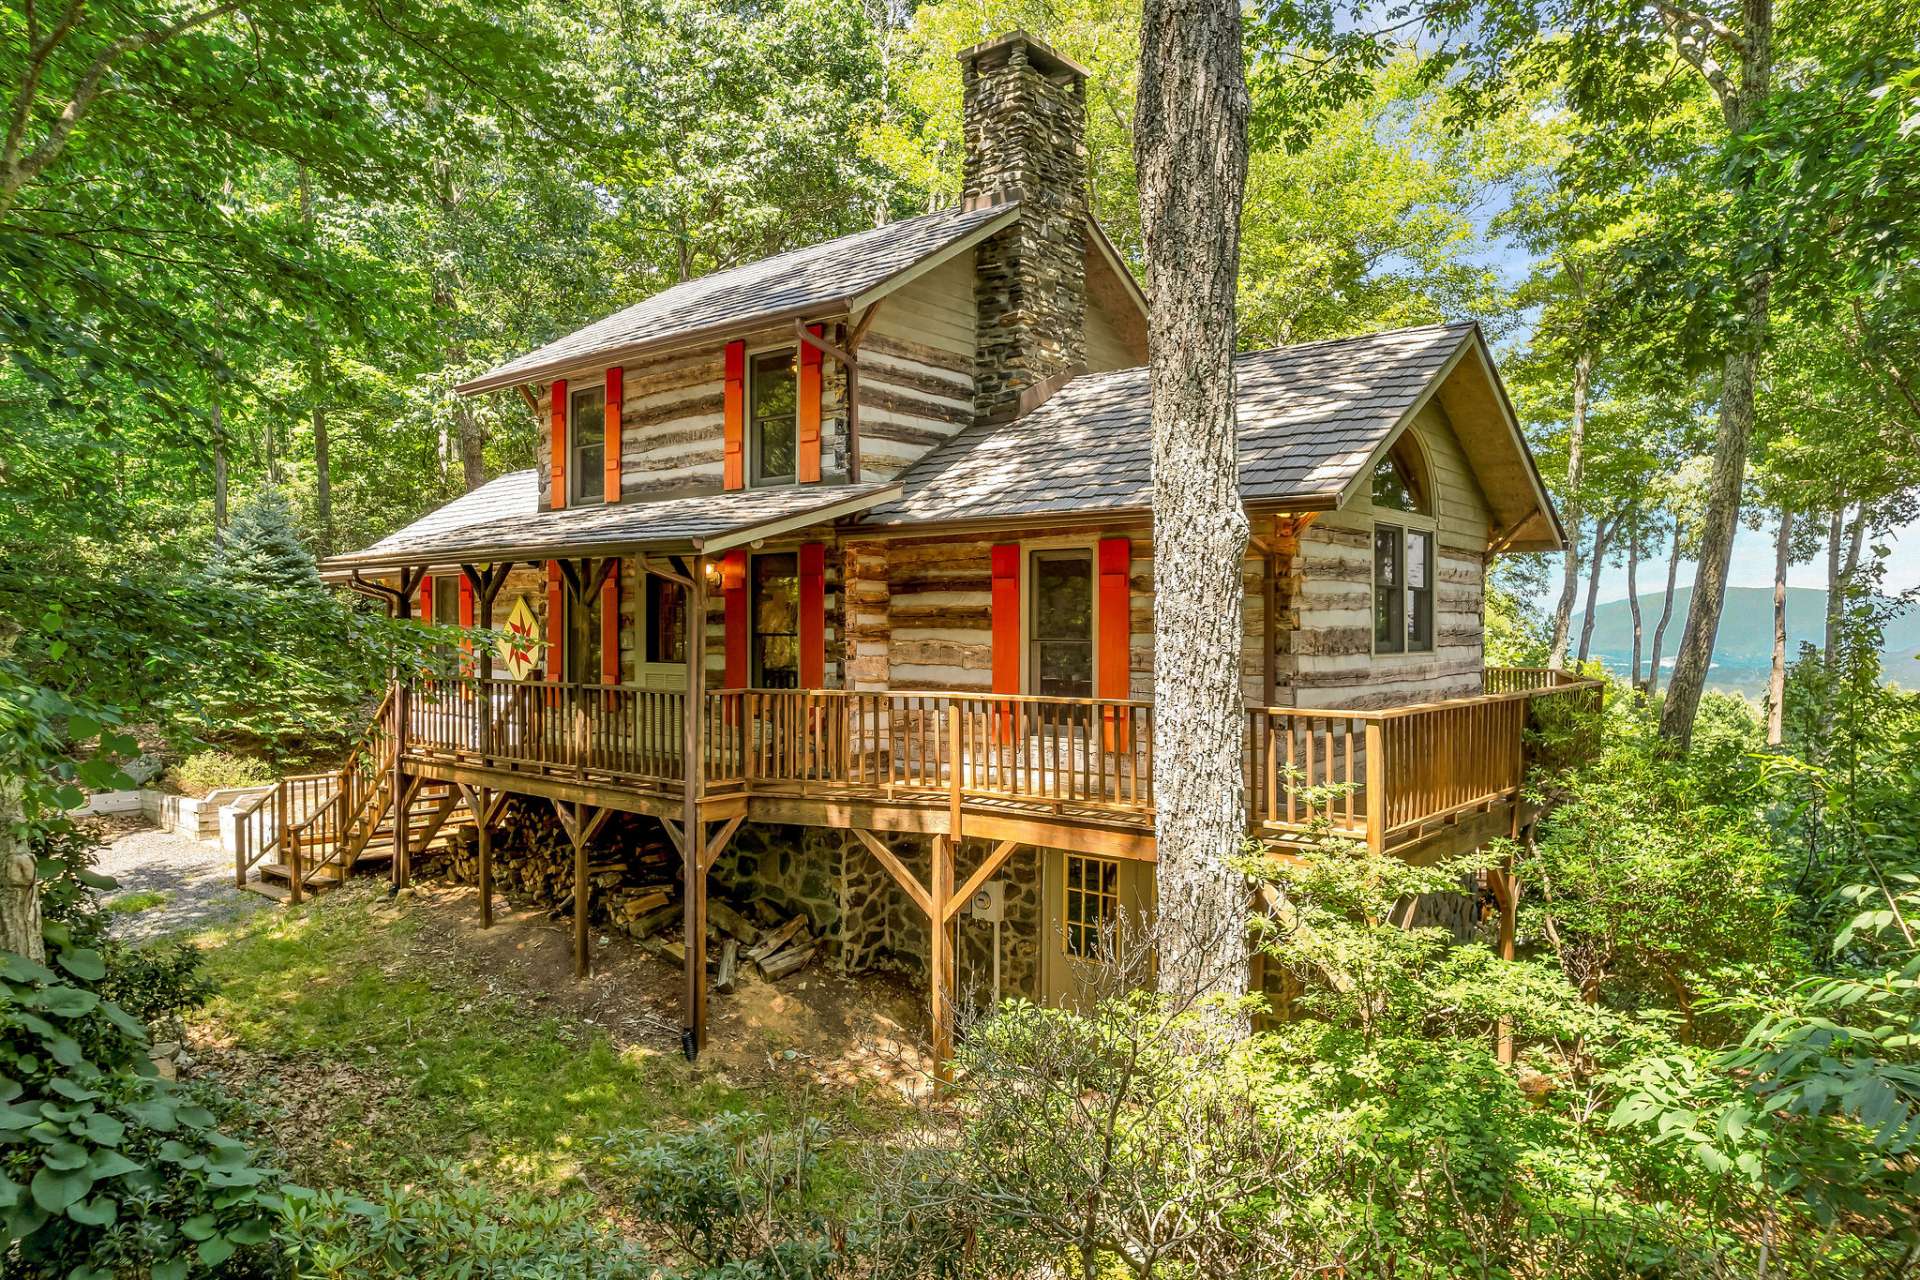 Situated on almost 2 private wooded acres with unique rock outcroppings and....